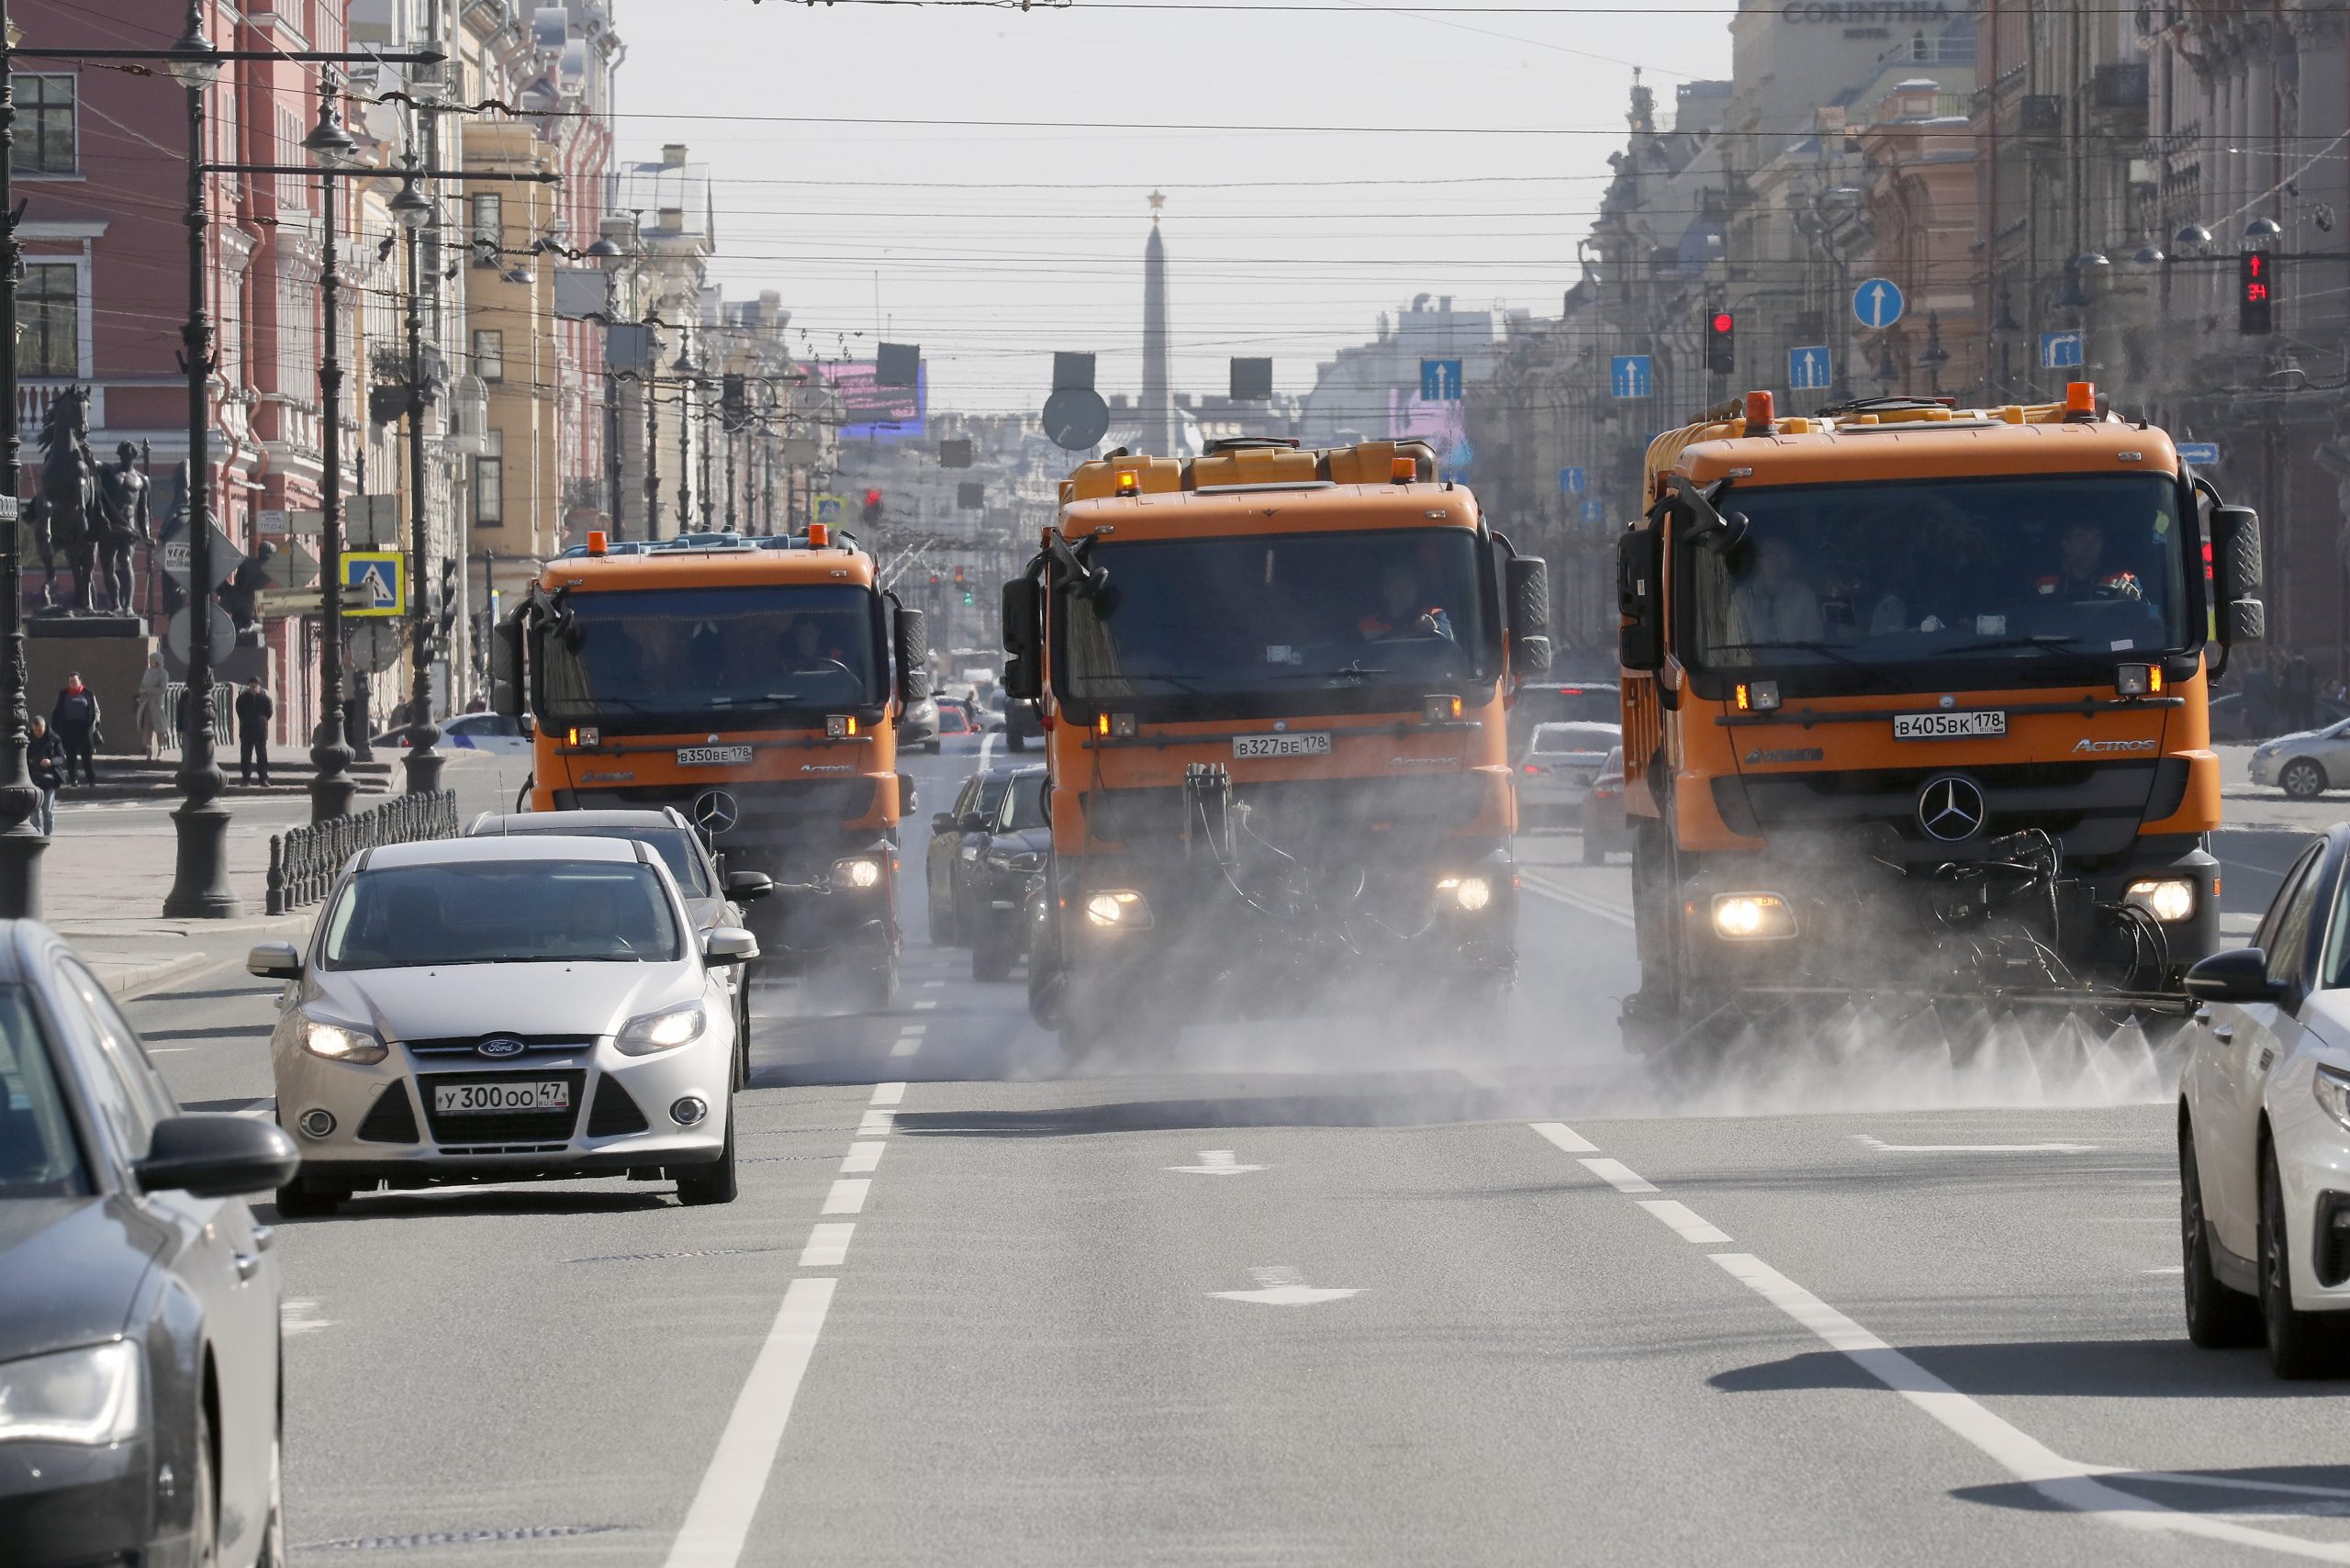 epa08348283 Cleaning cars disinfecting the Nevsky Prospekt in St. Petersburg, Russia, 07 April 2020. Russian authorities have extended the national lockdown with stay-at-home orders until the end of April in a bid to quell the spread of the COVID-19.  EPA/ANATOLY MALTSEV